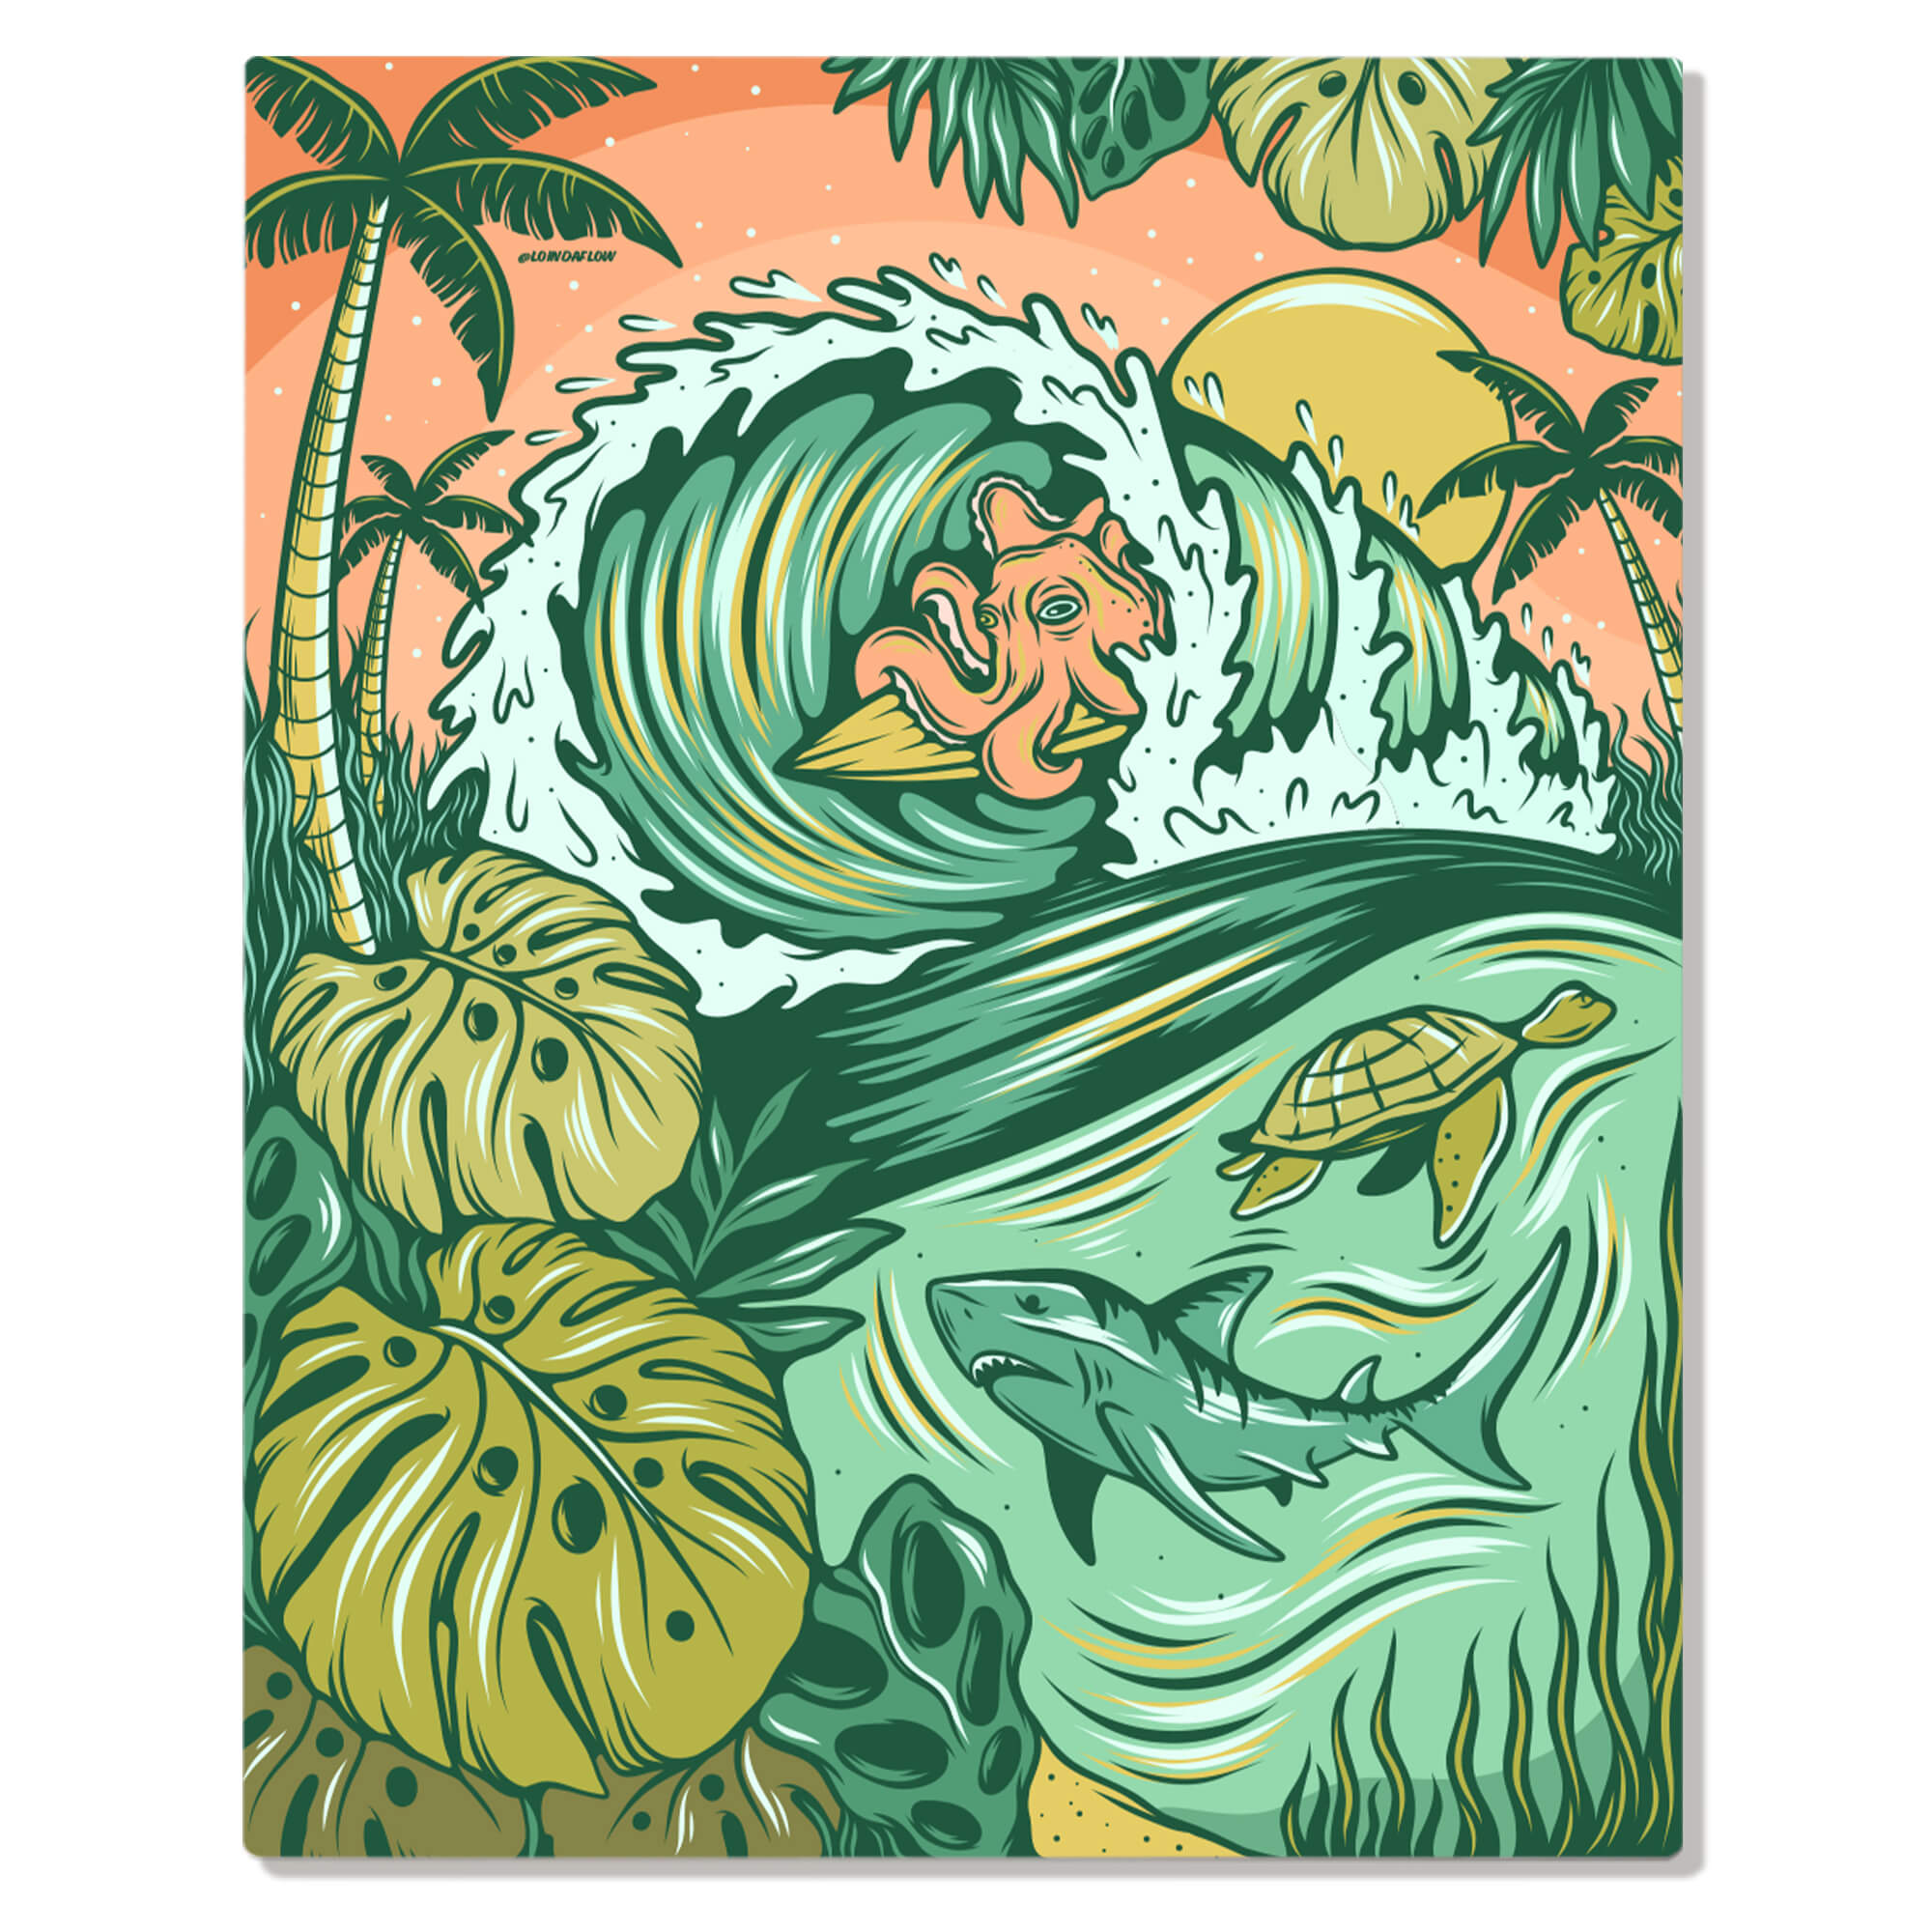 Metal art print of some colorful sea animals framed by tropical plants and leaves by Hawaii artist Laihha Organna